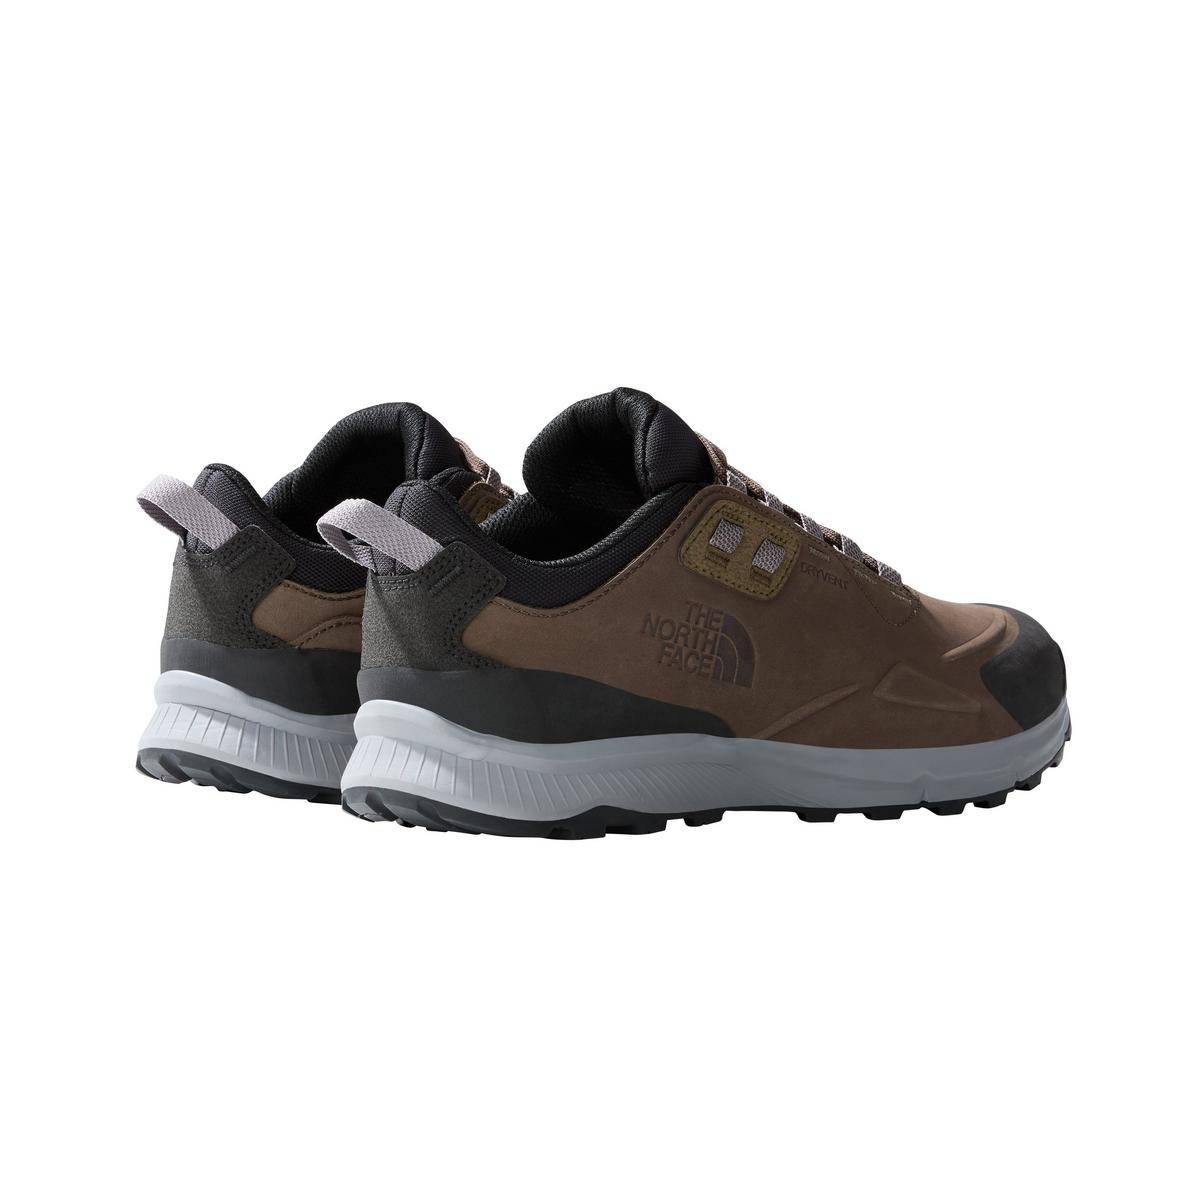 The North Face Men's Cragstone Waterproof Hiking Shoes - Brown